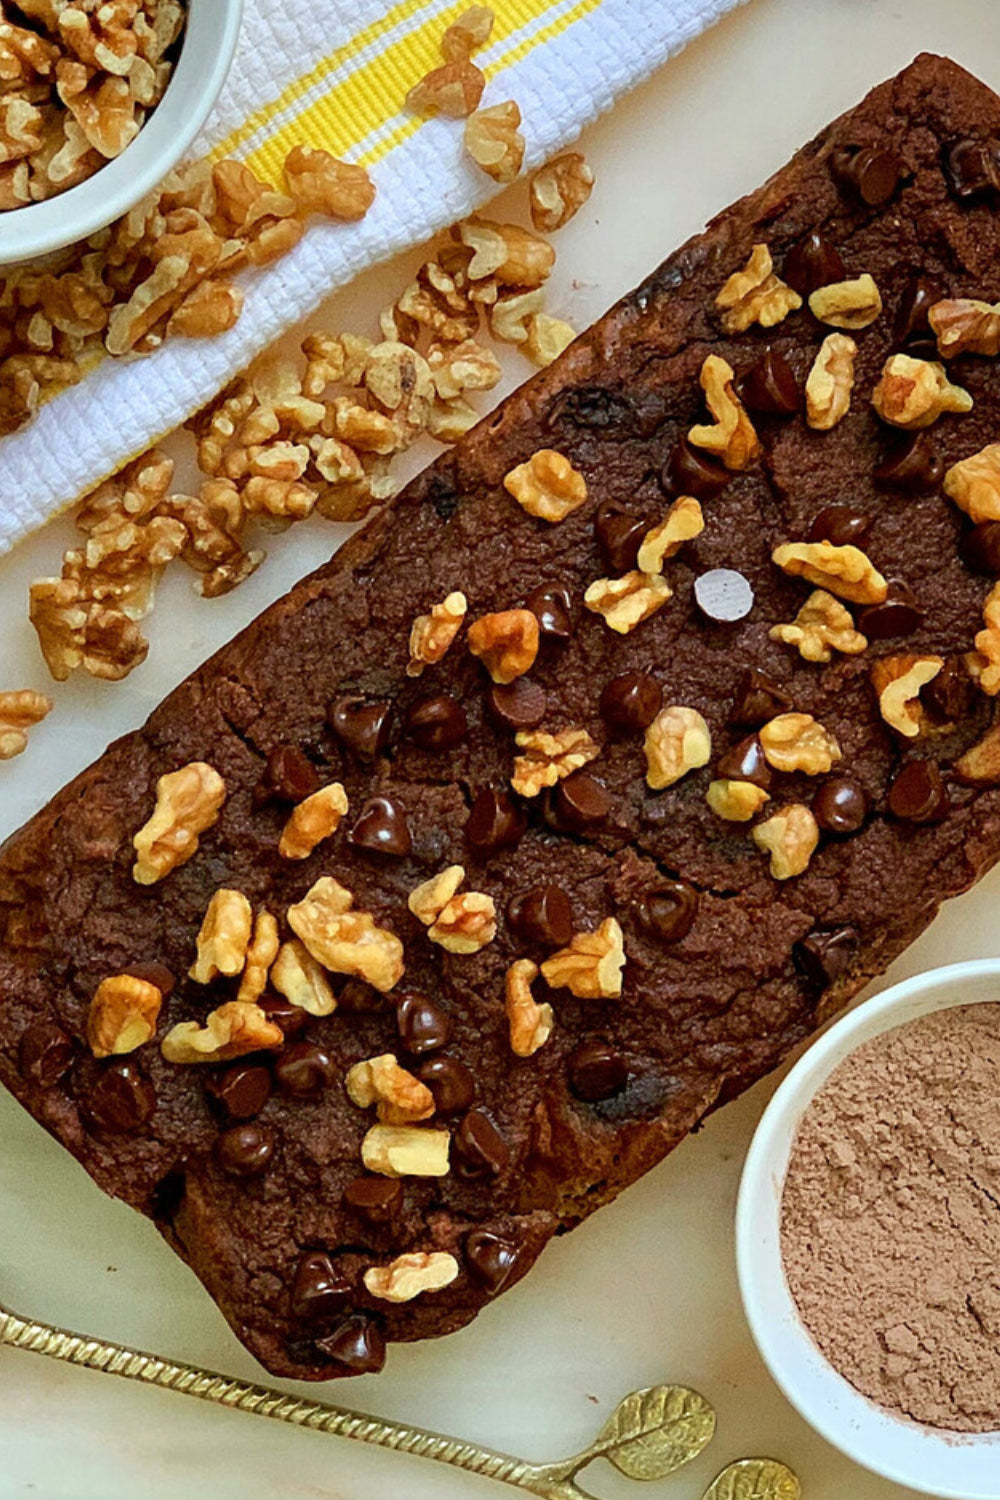 Banana Bread with Walnuts made with Vitamin Bounty Meal for Keto 